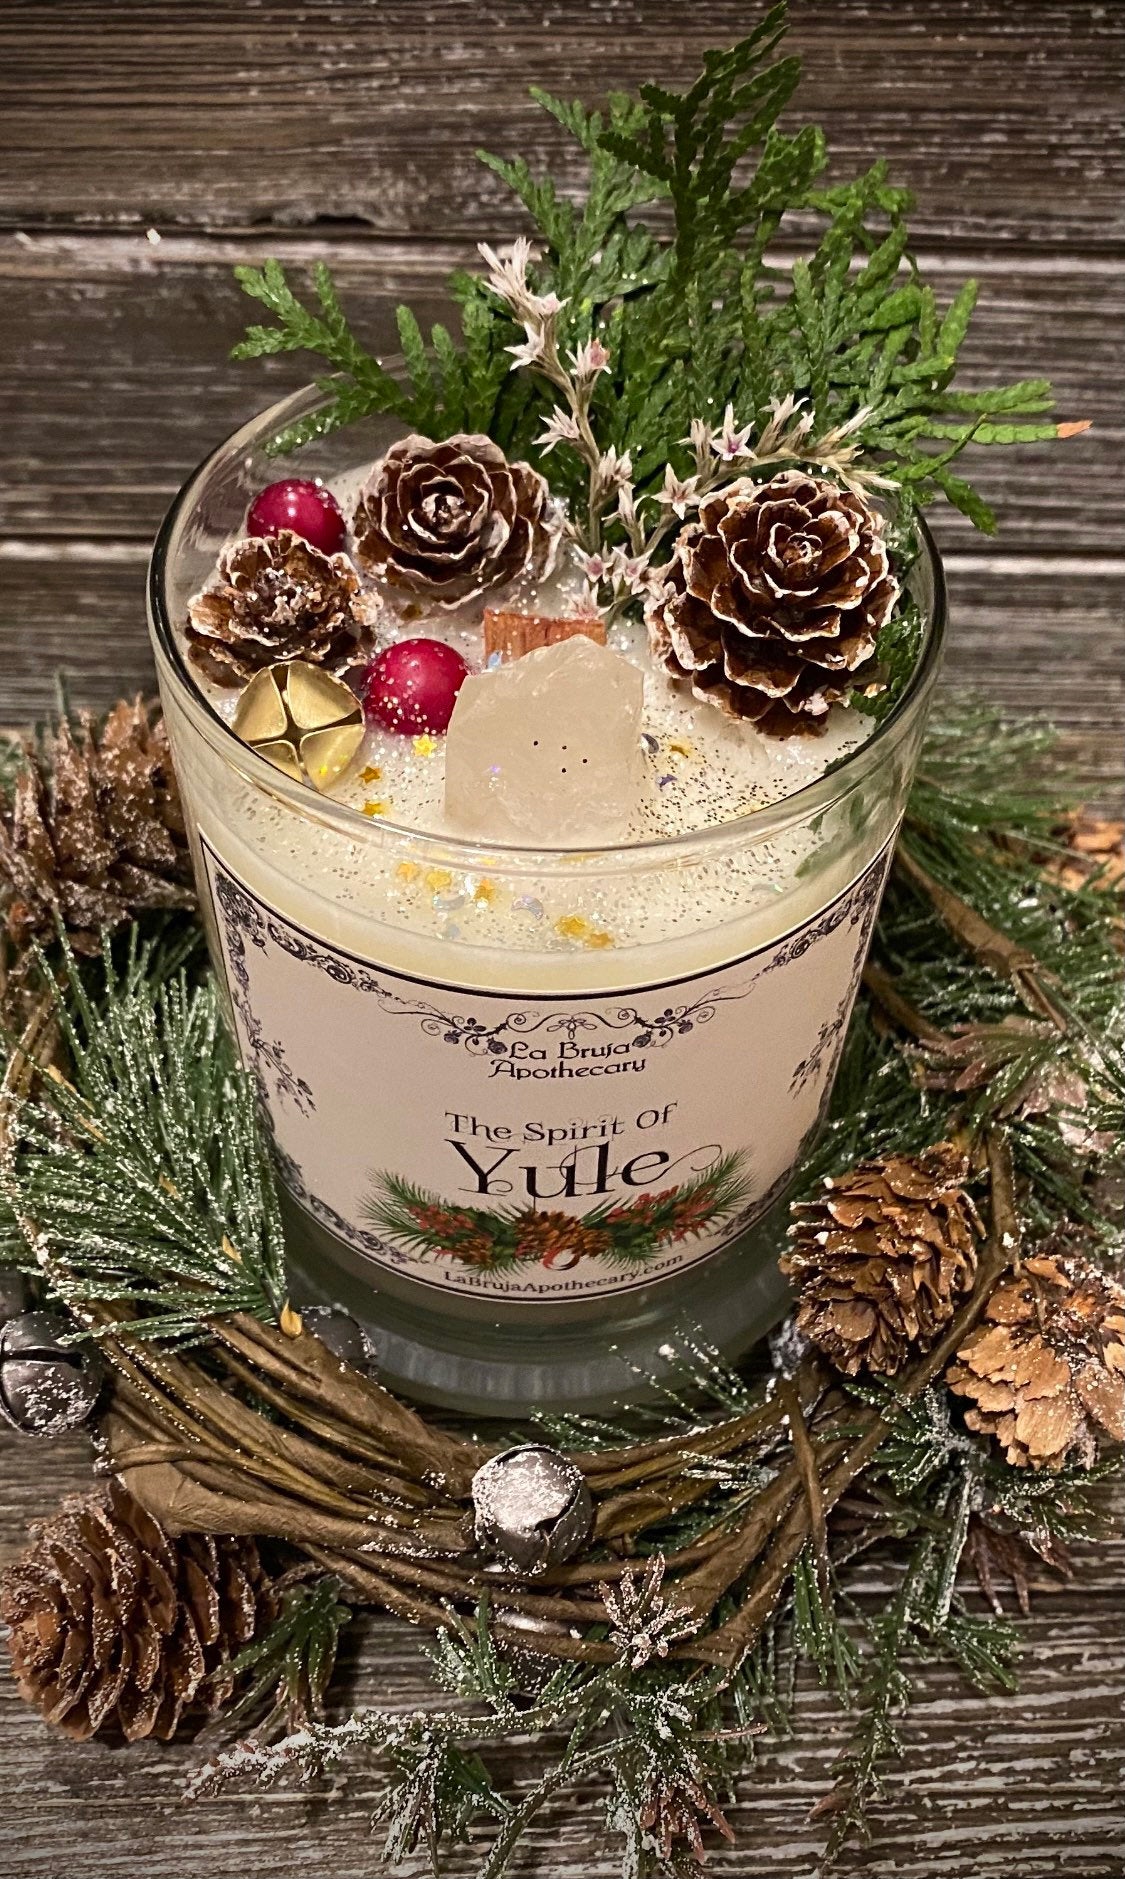 The Spirit of Yule™ Ritual Wax Melts, Witchy Christmas, Herbal Wax Melts, Christmas Wax Melts